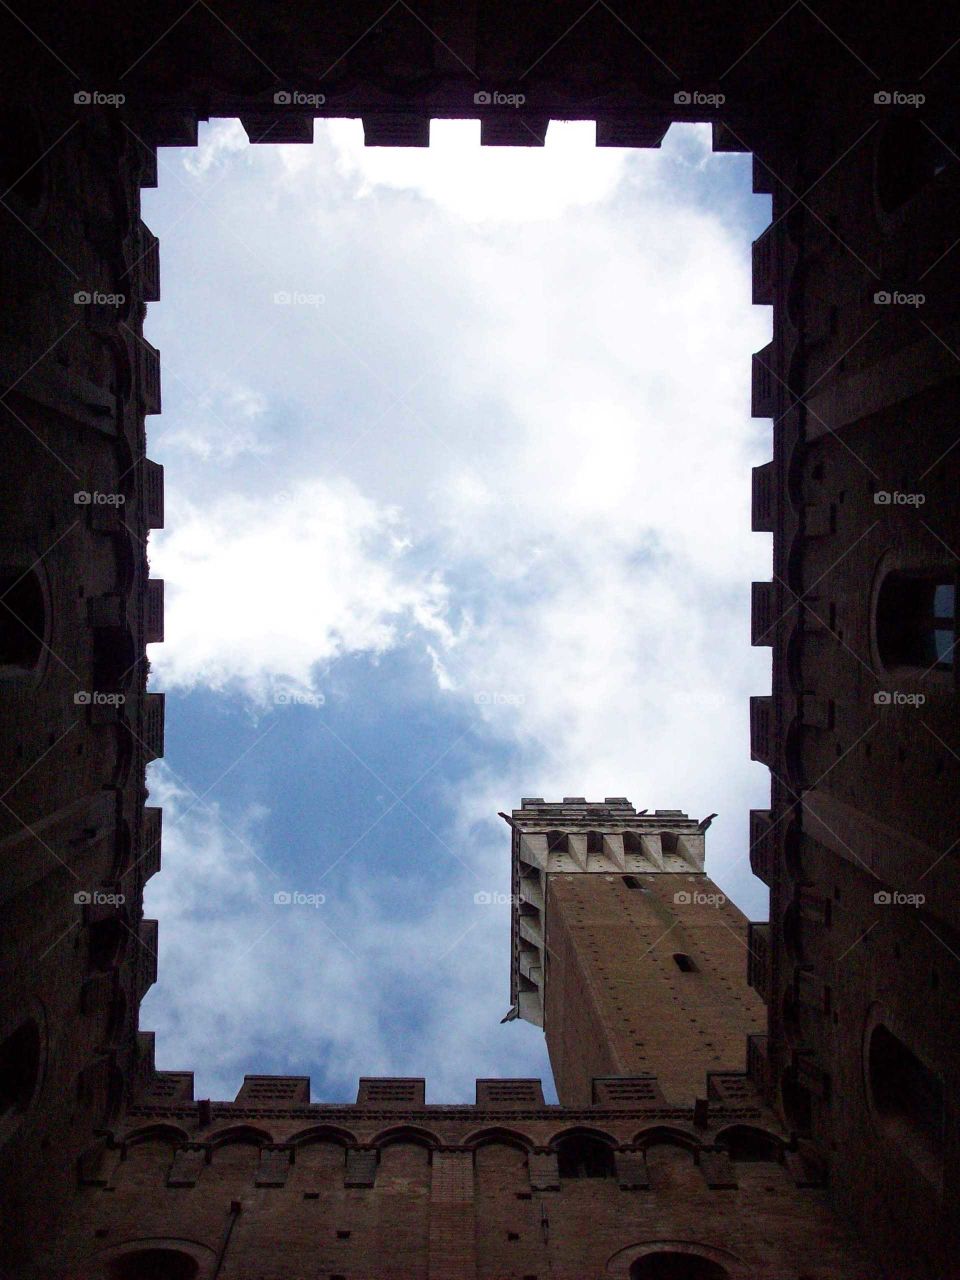 Looking up through an ancient tower